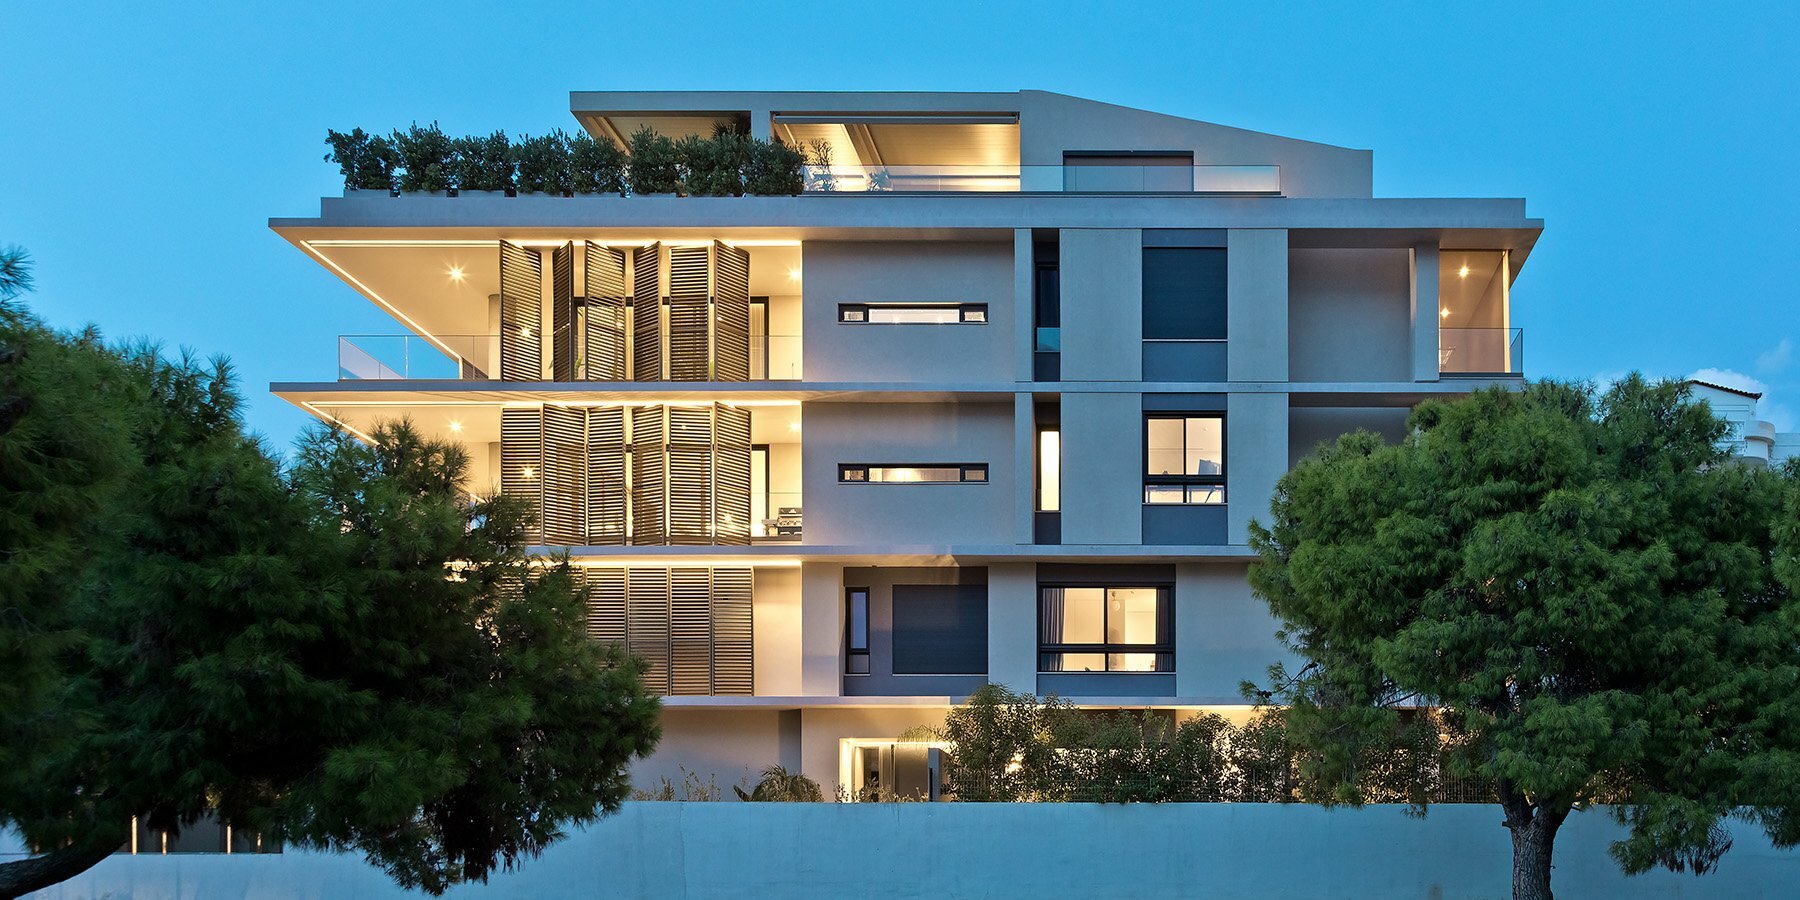 residential-complex-voula-athens-free-architects-micromega-designboom-1800-2